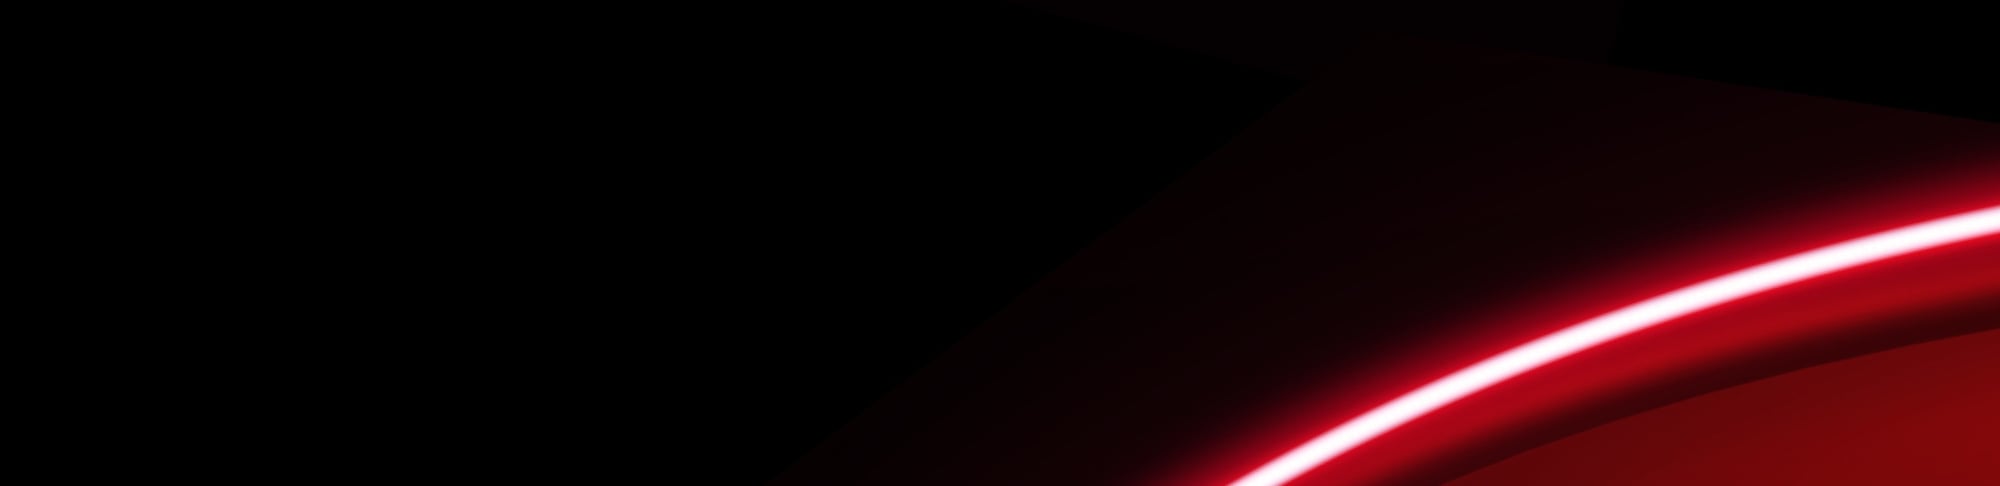 LG-Mission-for-the-future-red-banner-2800x1500-v009